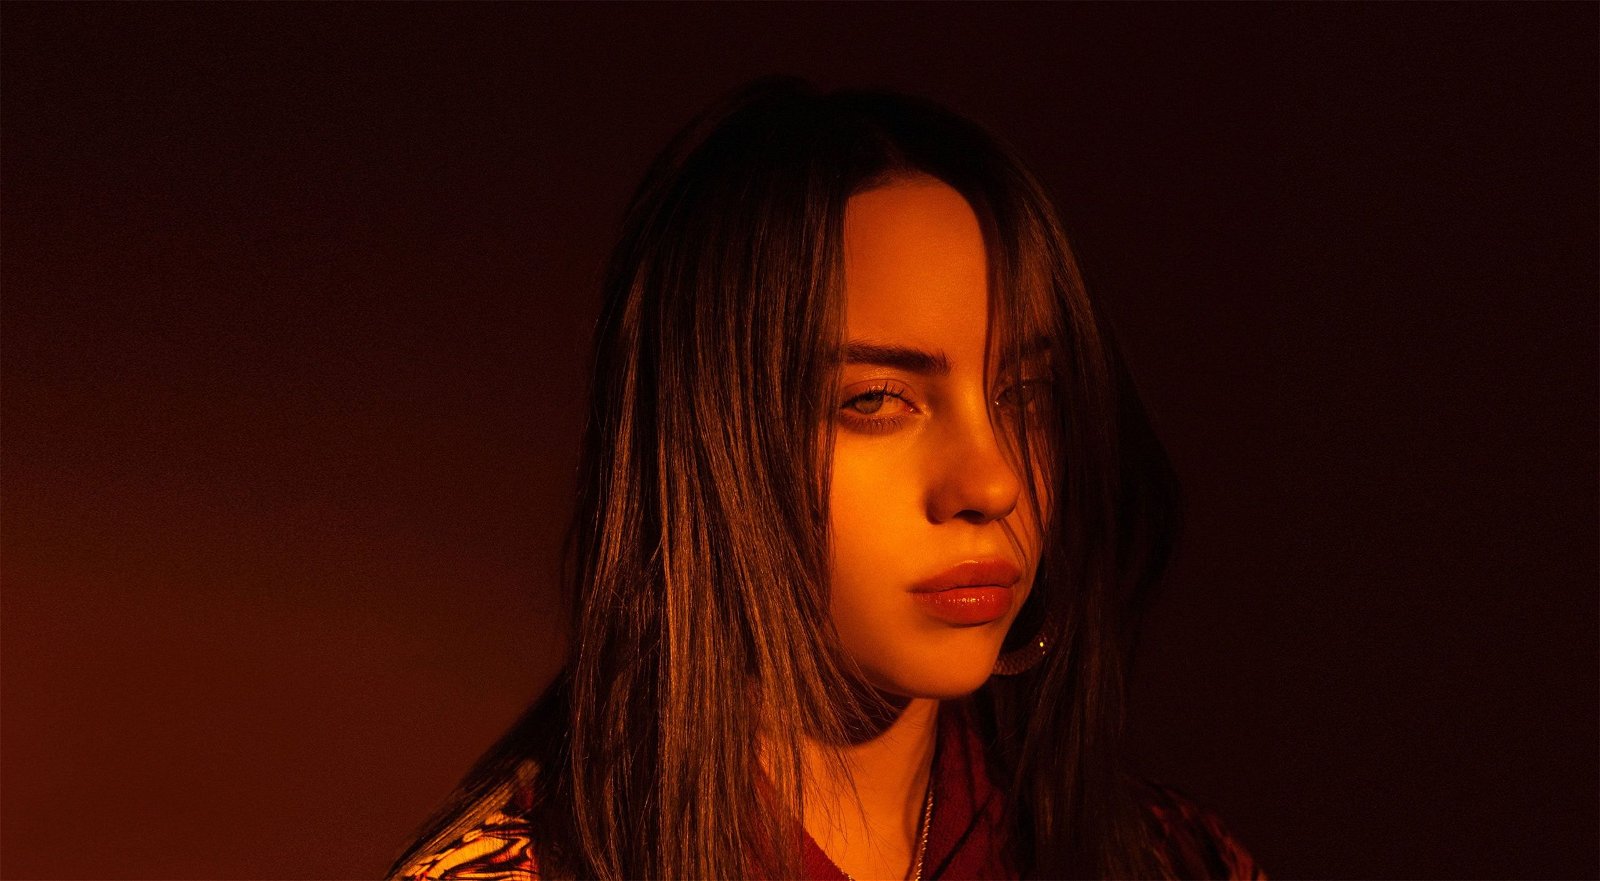 What Is The “Ugliest thing” That Billie Eilish Told David Letterman Following Their Run At Go-Karting?